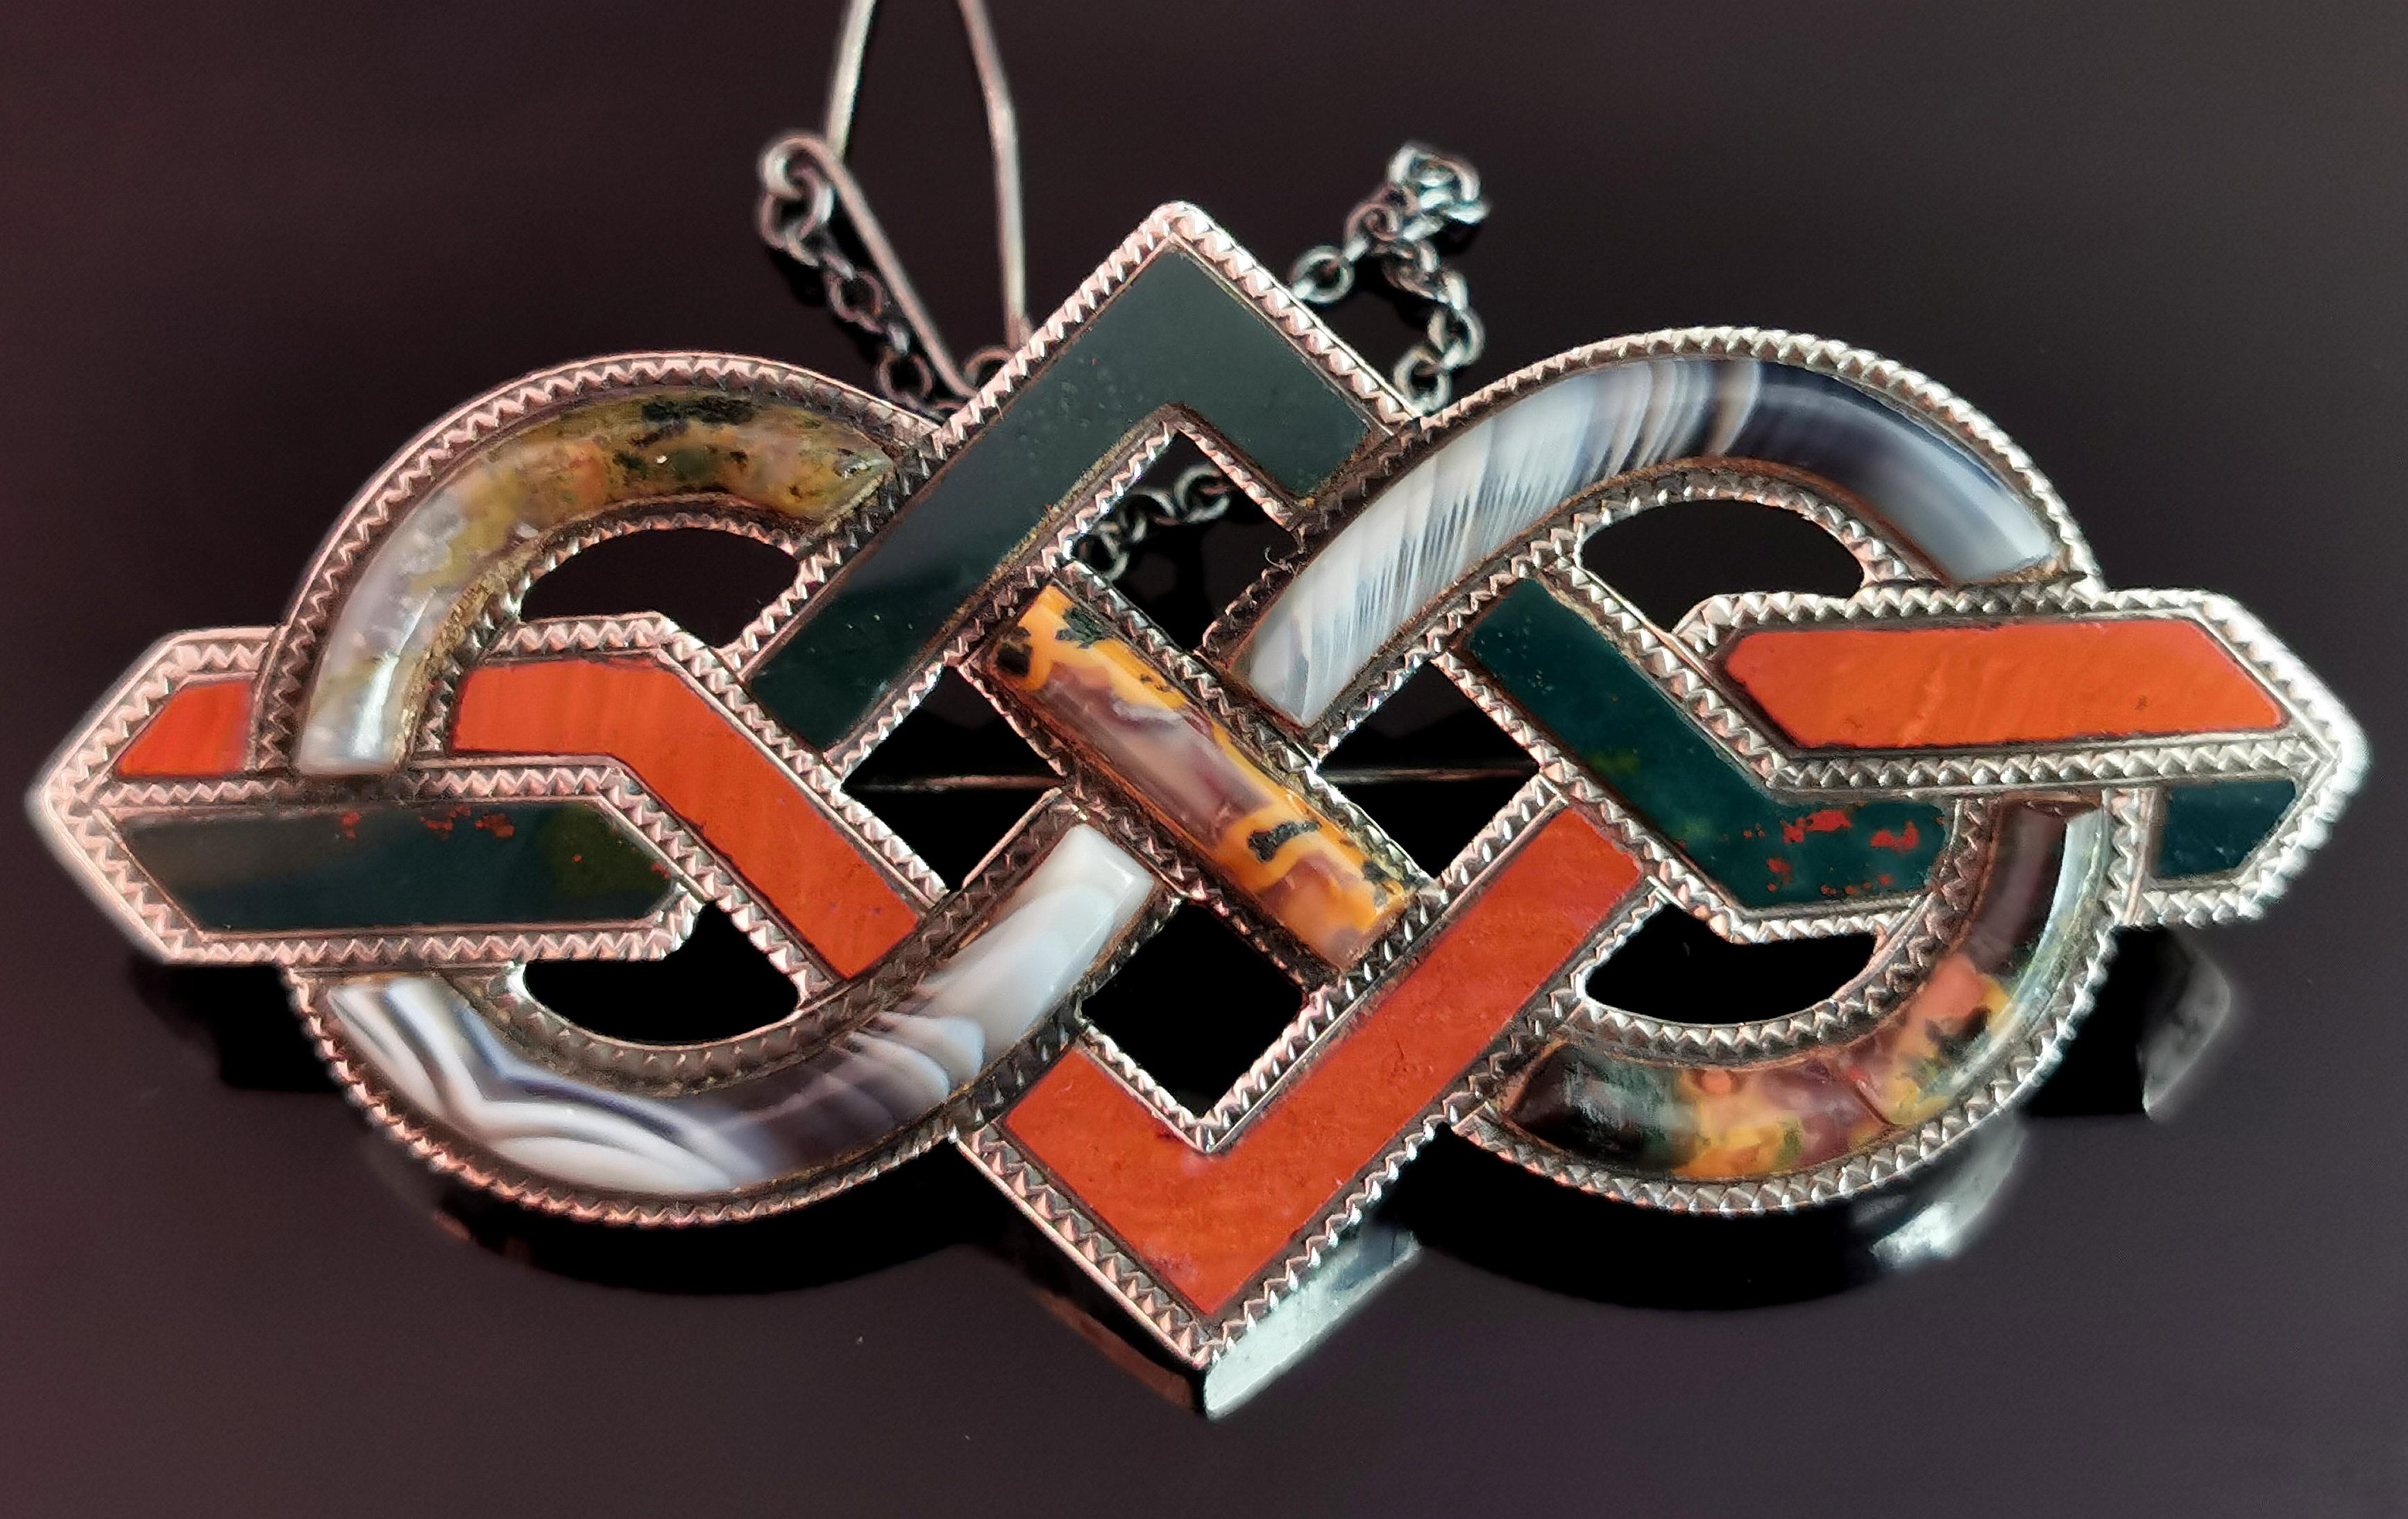 A beautiful and grand antique, Scottish agate and Silver knot brooch.

It has an infinity loop design, interwoven with a geometric pattern to form a knot shape.

The brooch is set with high polished agate including Red Jasper, Bloodstone, Montrose